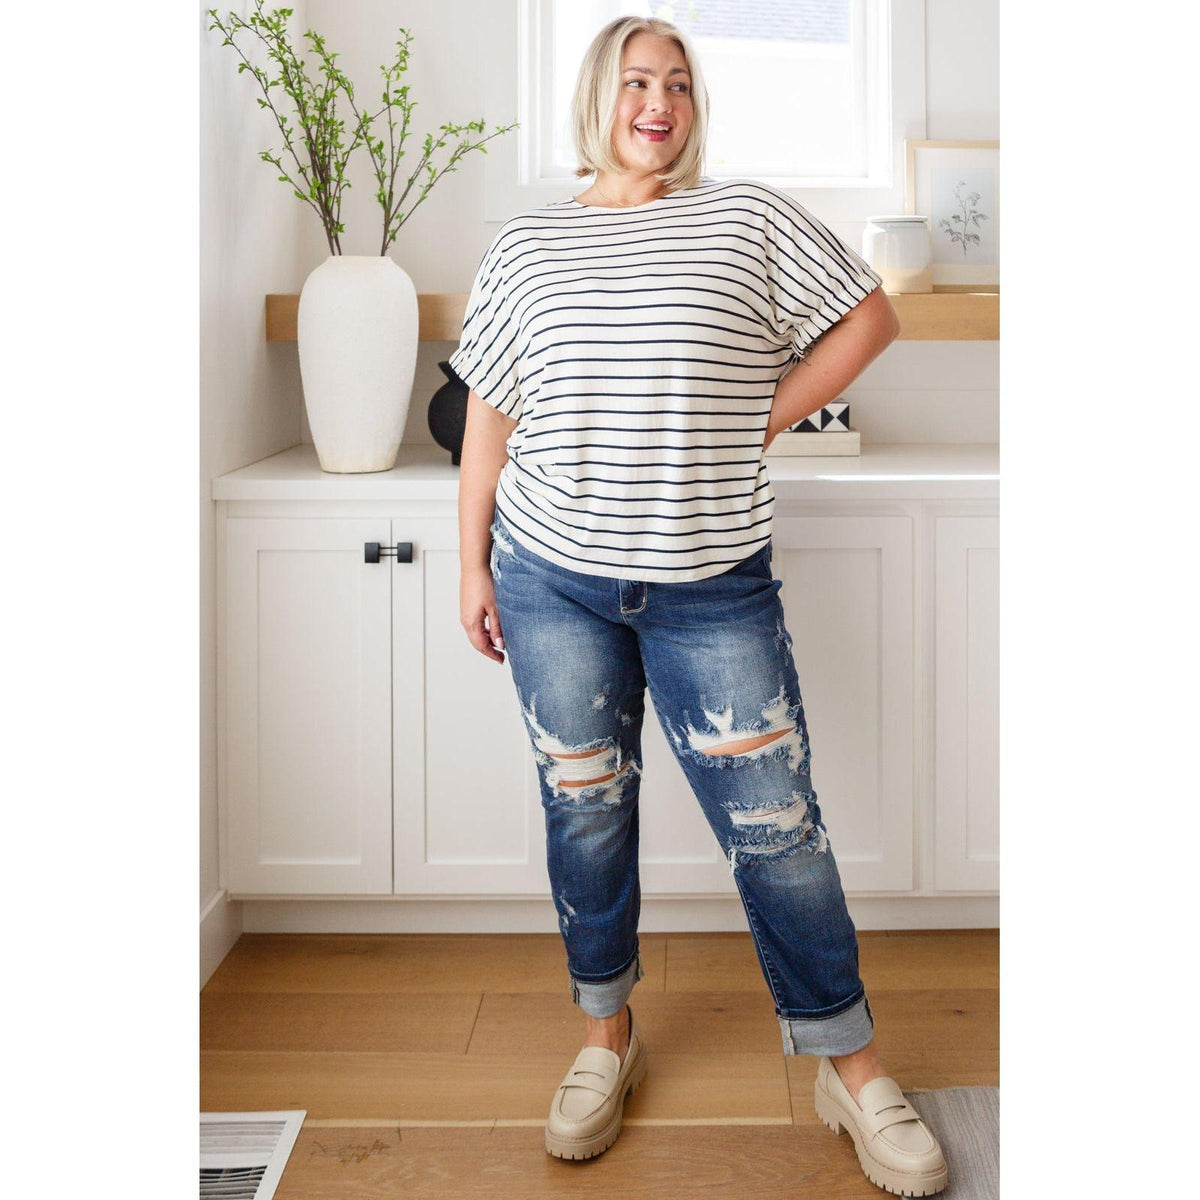 Much Ado About Nothing Striped Top - becauseofadi